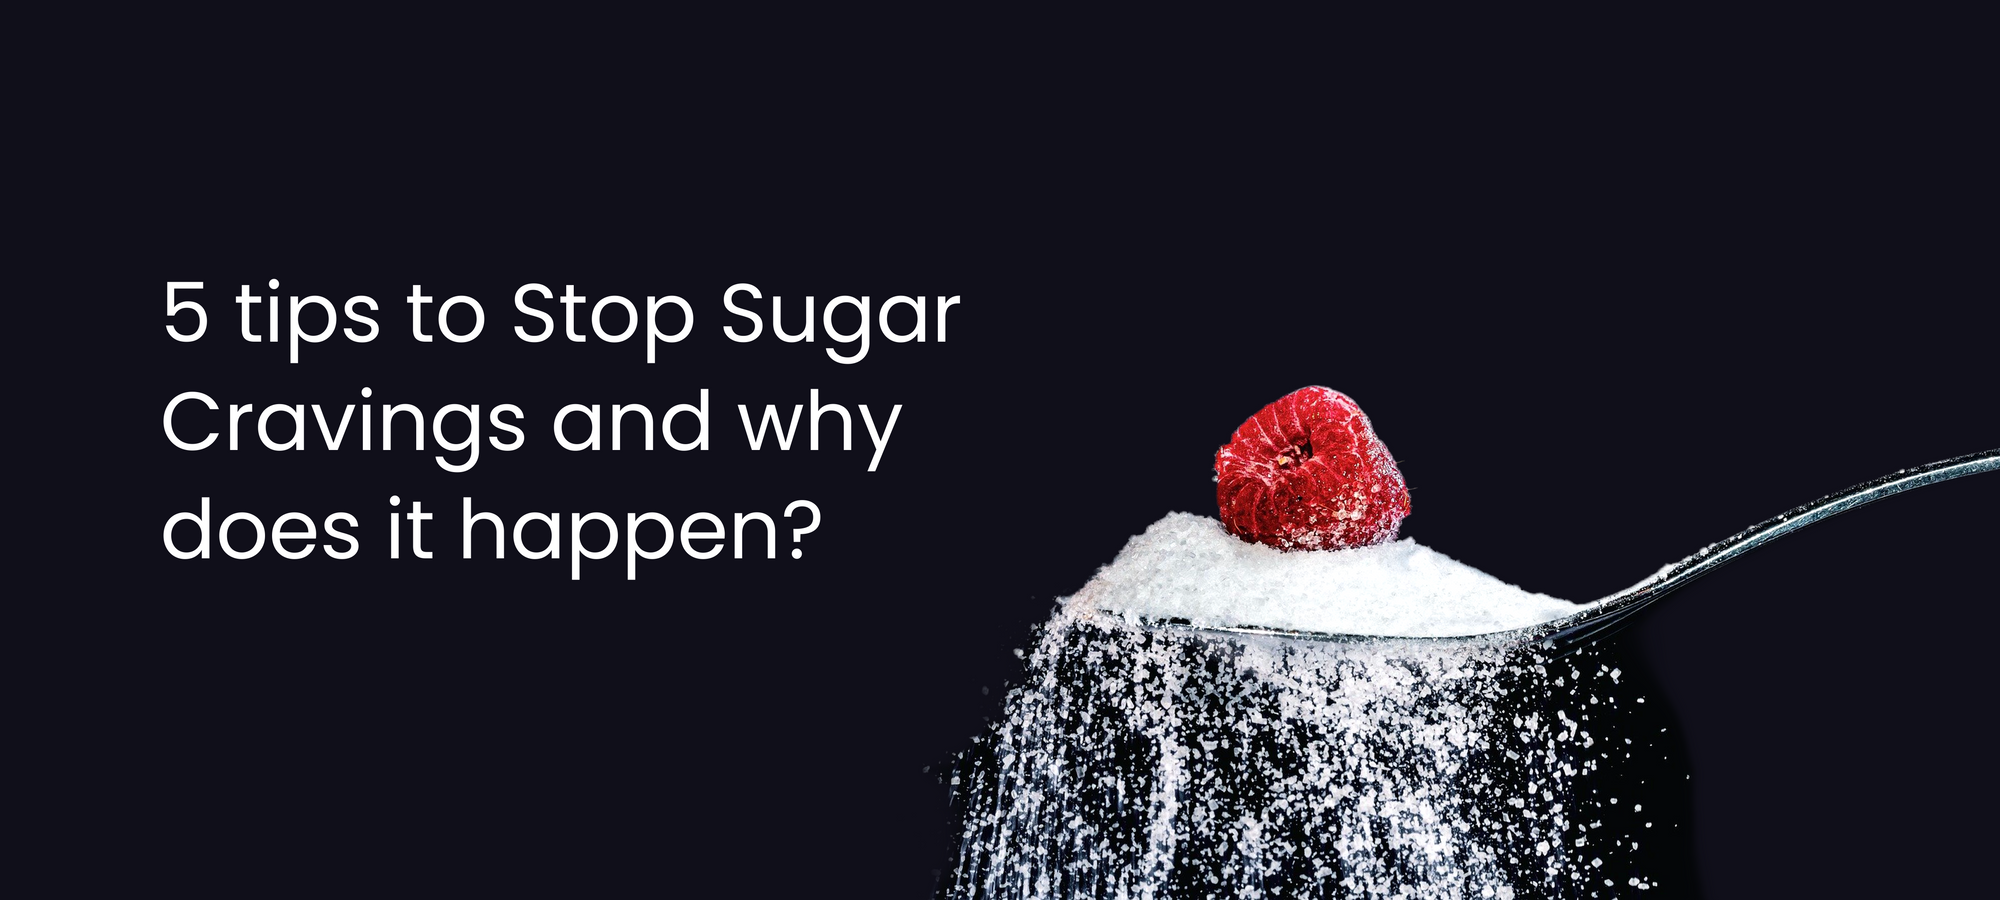 5 tips to Stop Sugar Cravings and why does it happen?